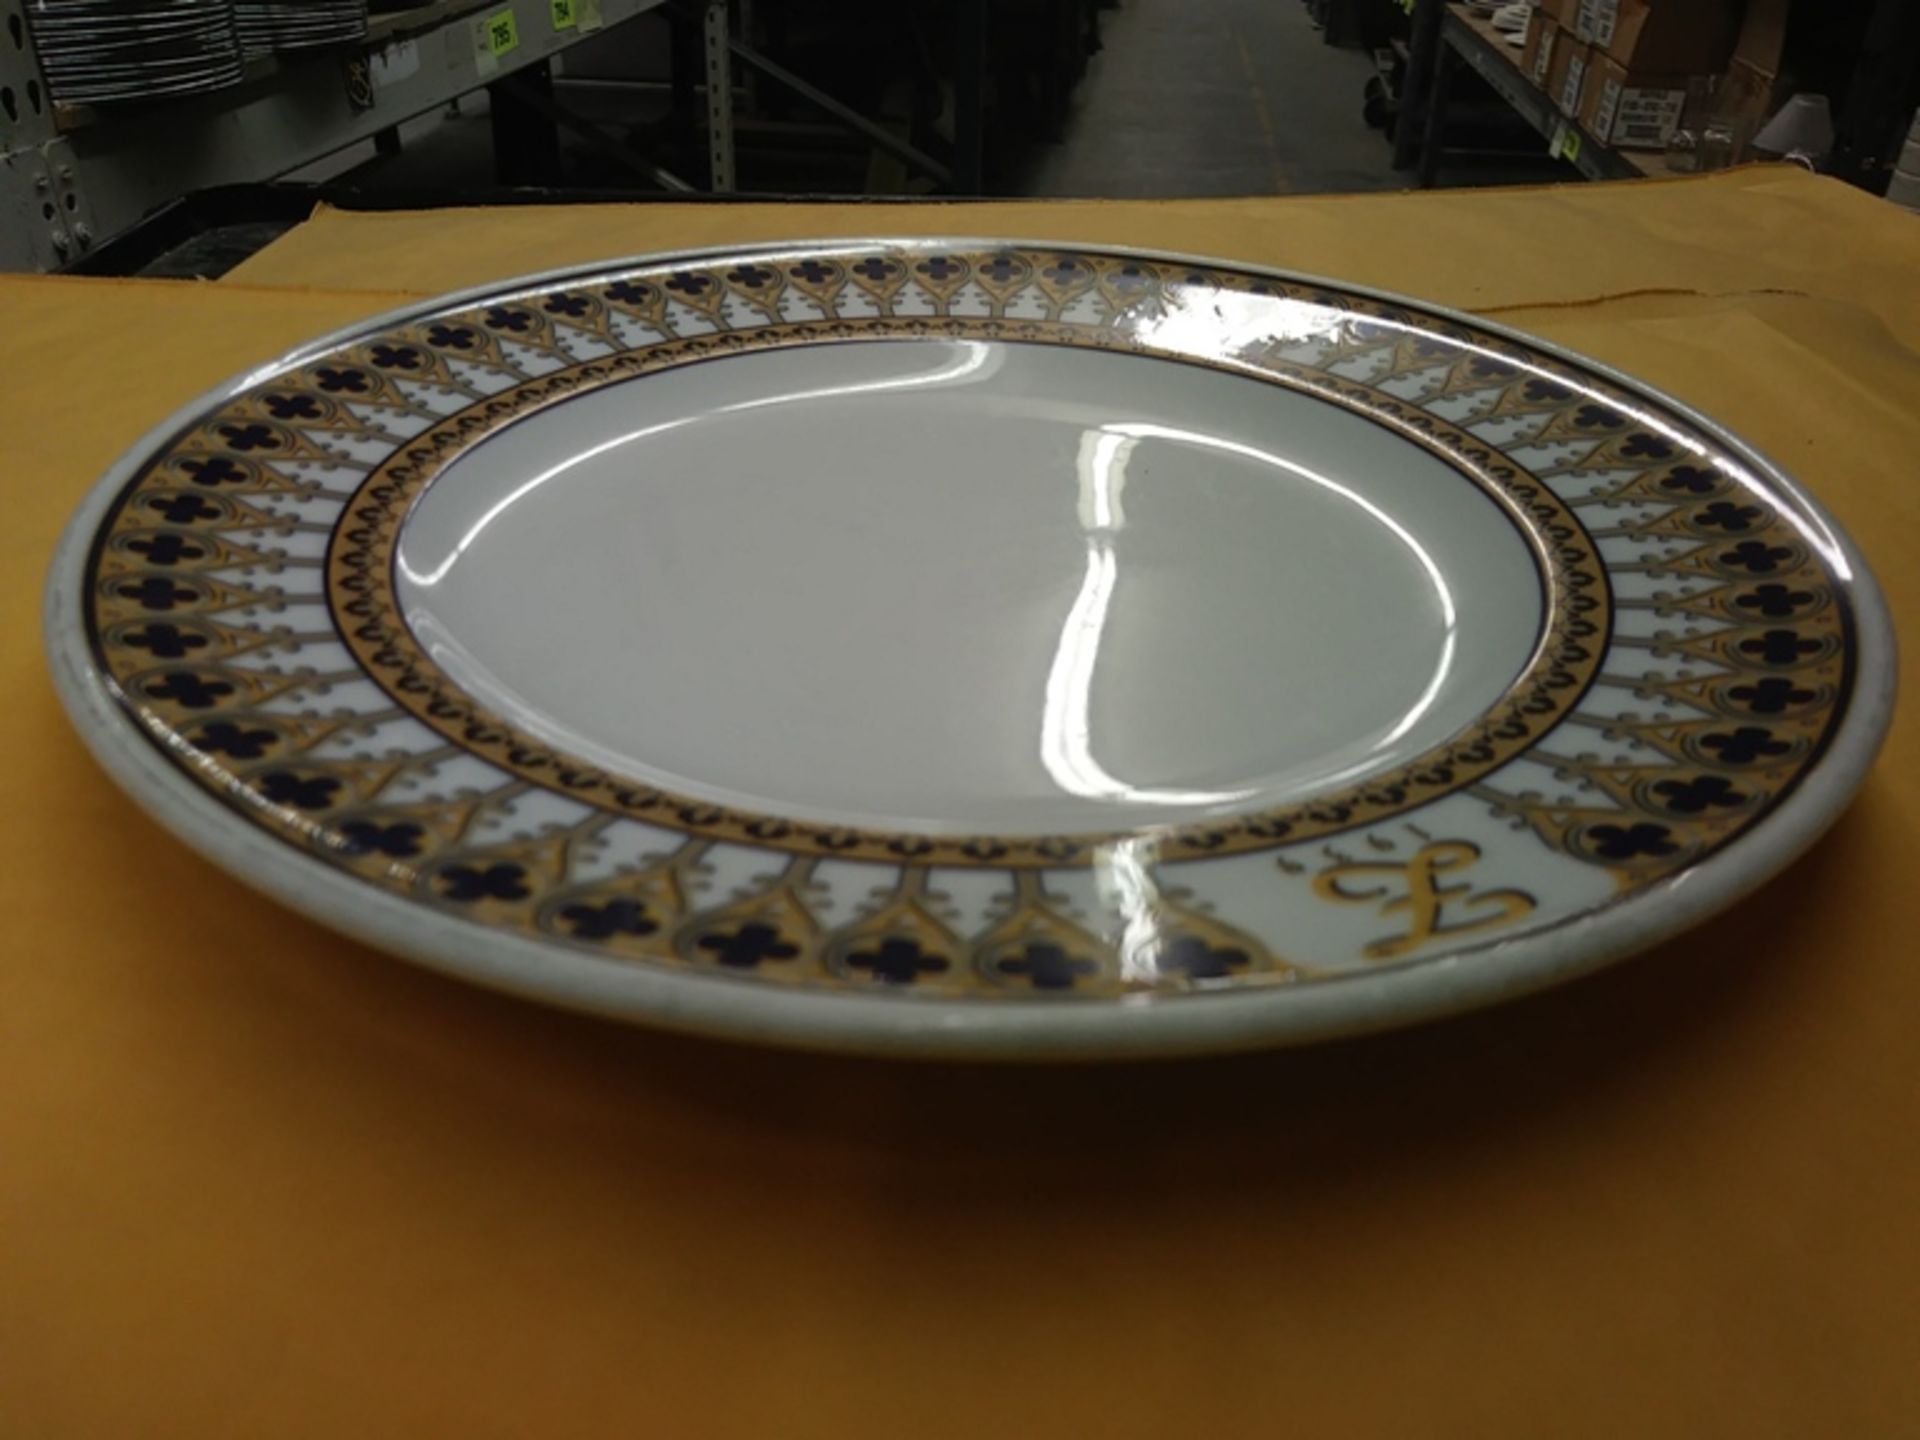 NEW 10" SCHONWALD PLATE (INCLUDES QTY: 22) - Image 3 of 3